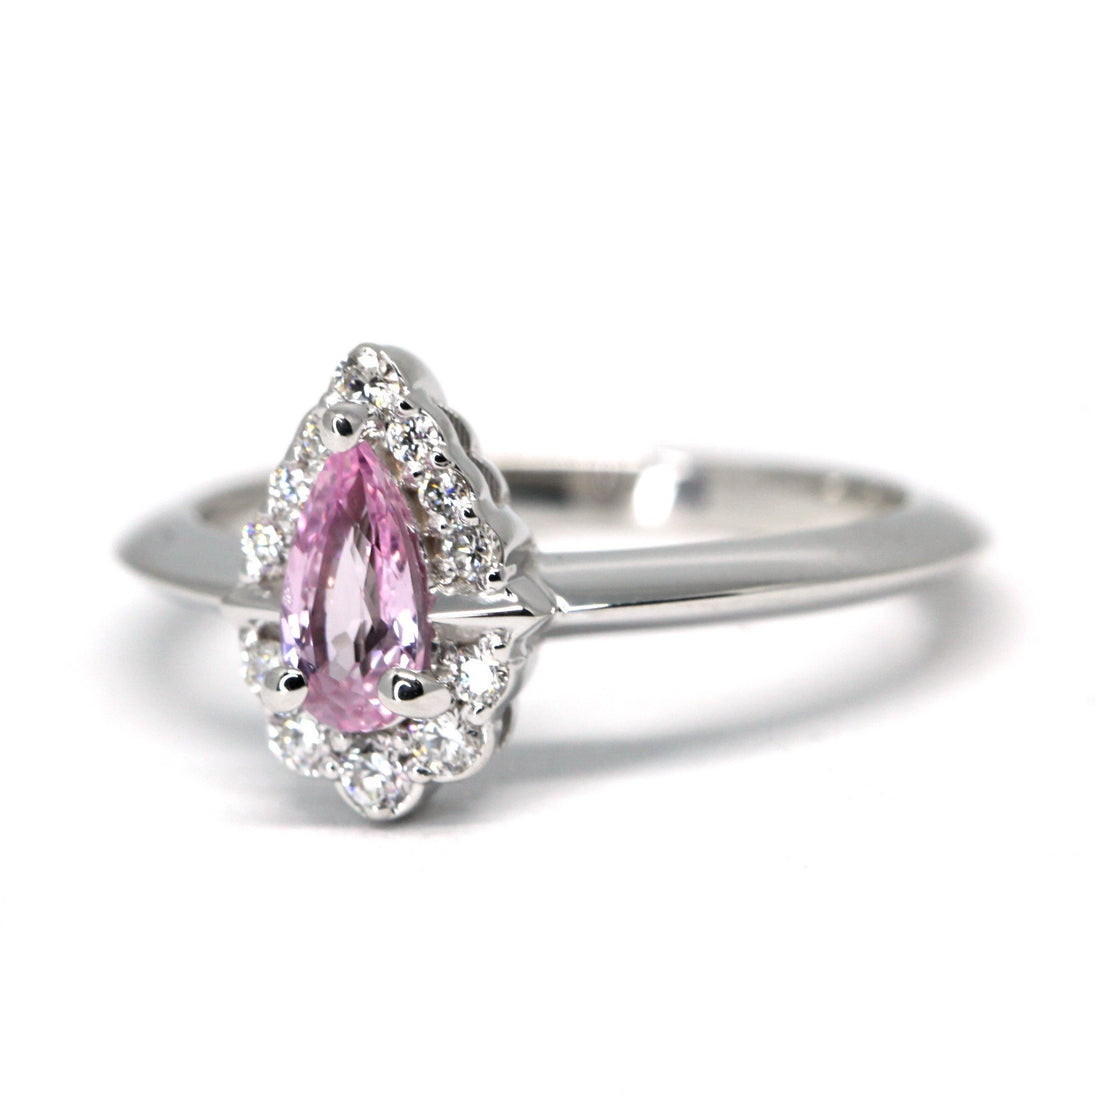 Side view of pink sapphire engagement ring bena jewelry montreal pear shape natural pink gemstone edgy bridal custom made jewelry bridal engagement ring diamond halo made in montreal handmade in canada bena jewelry fine jewelry Montreal Little italy jeweler